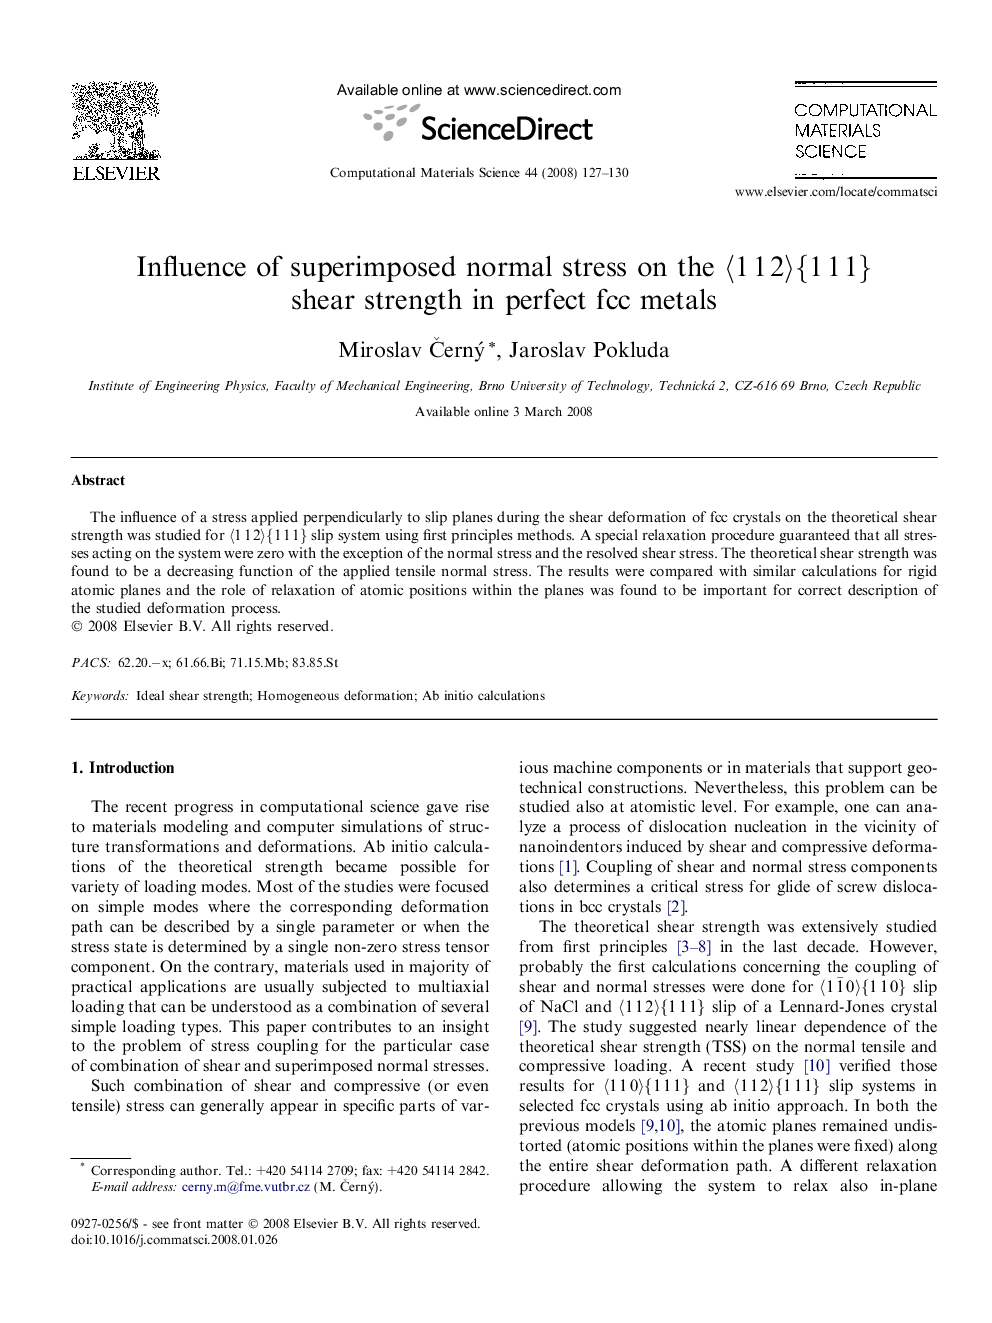 Influence of superimposed normal stress on the ã112ã{111} shear strength in perfect fcc metals